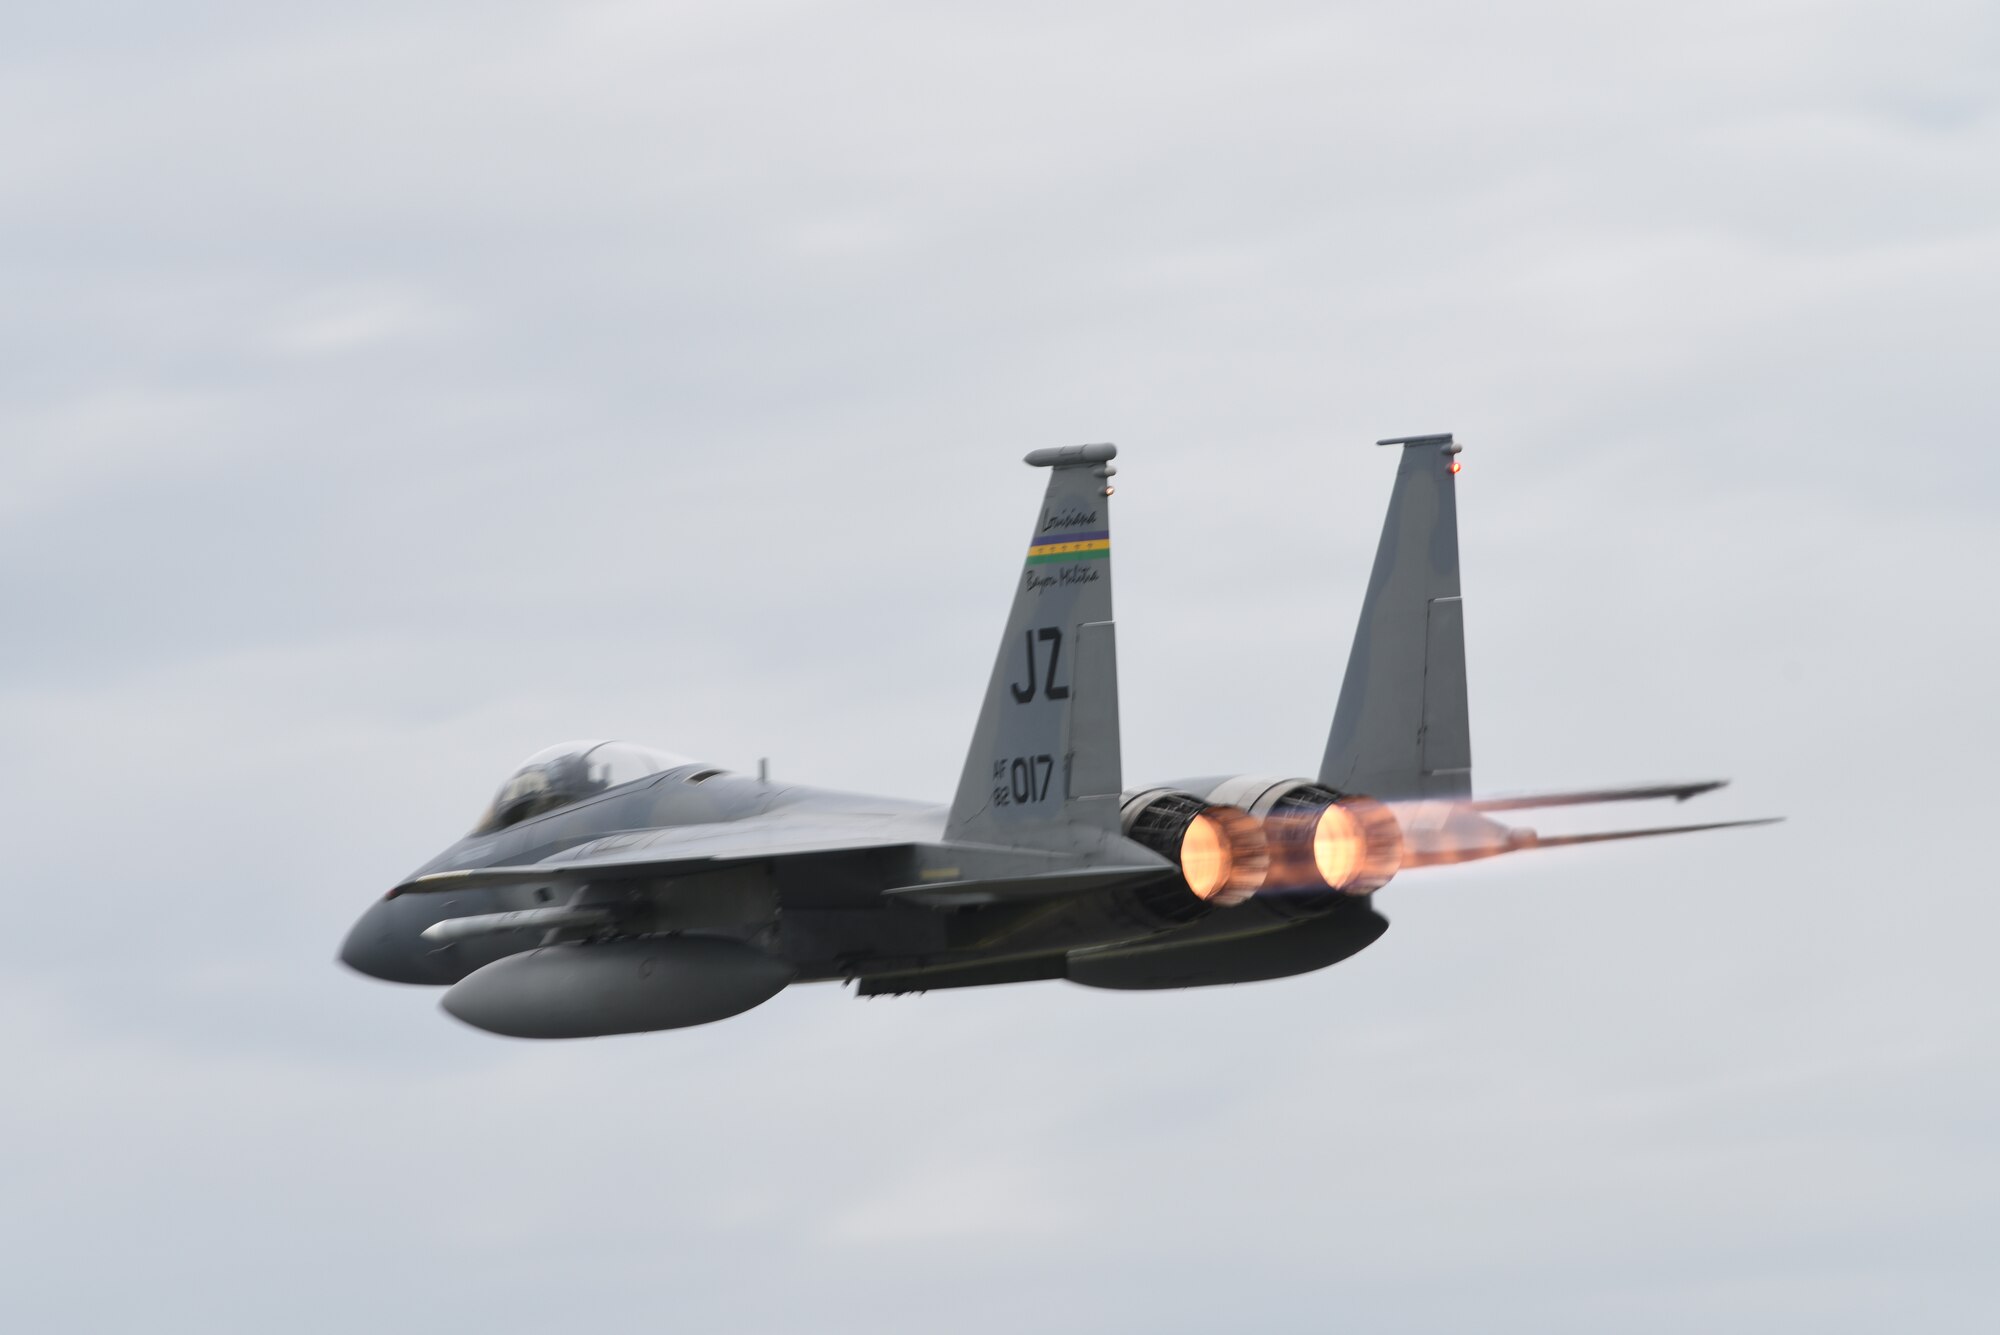 A U.S. Air Force F-15C Eagle assigned to the 194th Expeditionary Fighter Squadron, California Air National Guard, takes off during Exercise Diamond Storm at Royal Australian Air Force Base Darwin, Northern Territory, May 9, 2019.